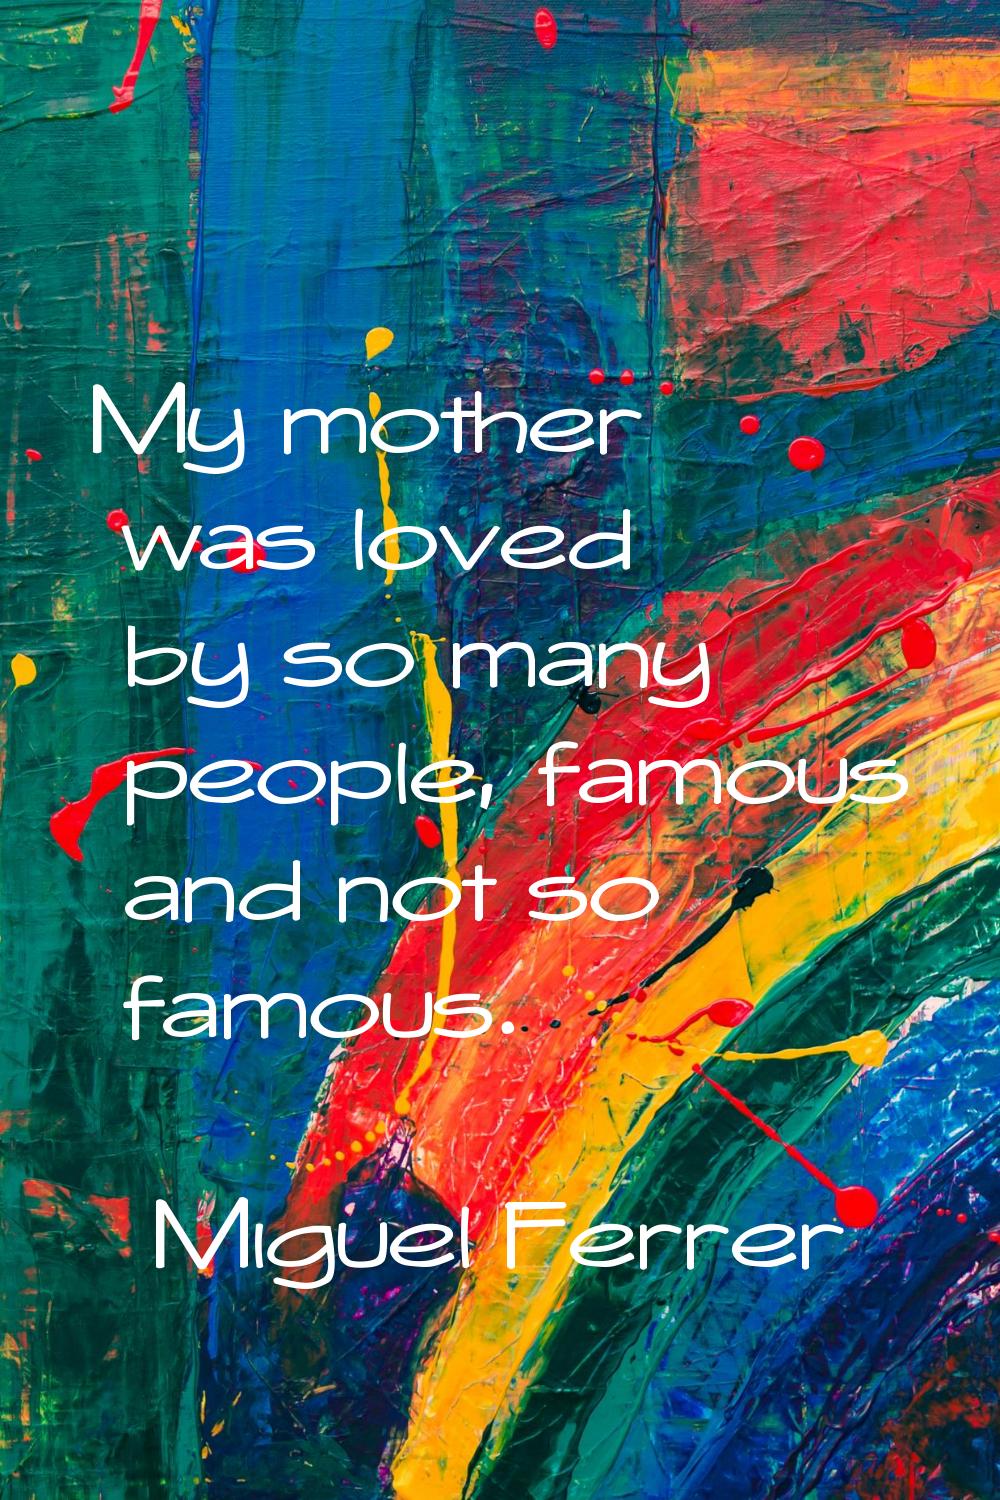 My mother was loved by so many people, famous and not so famous.